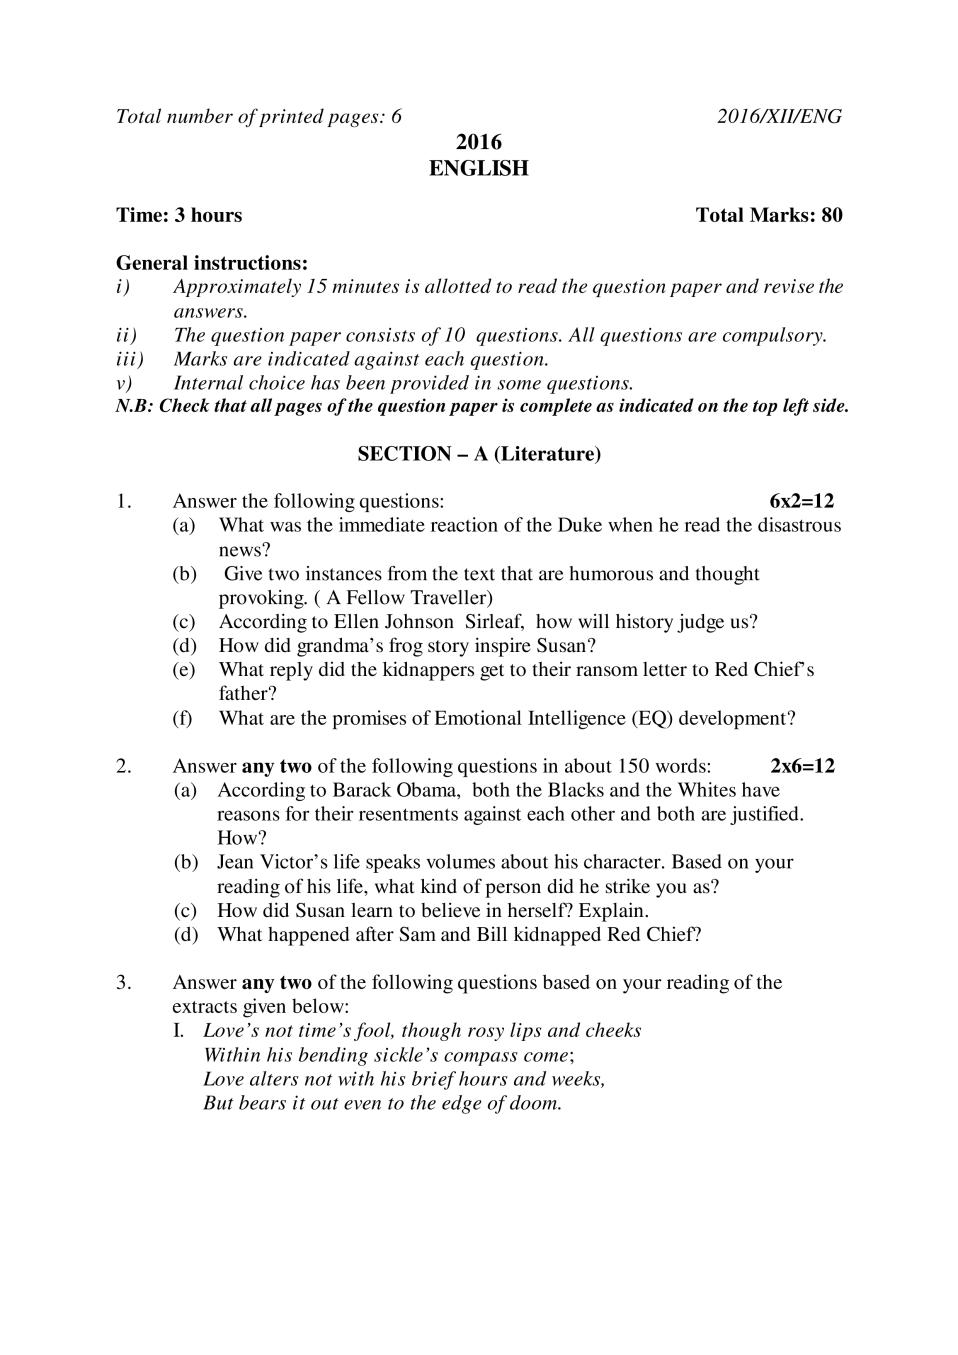 NBSE Class 12 Question Paper 2016 for English - Page 1